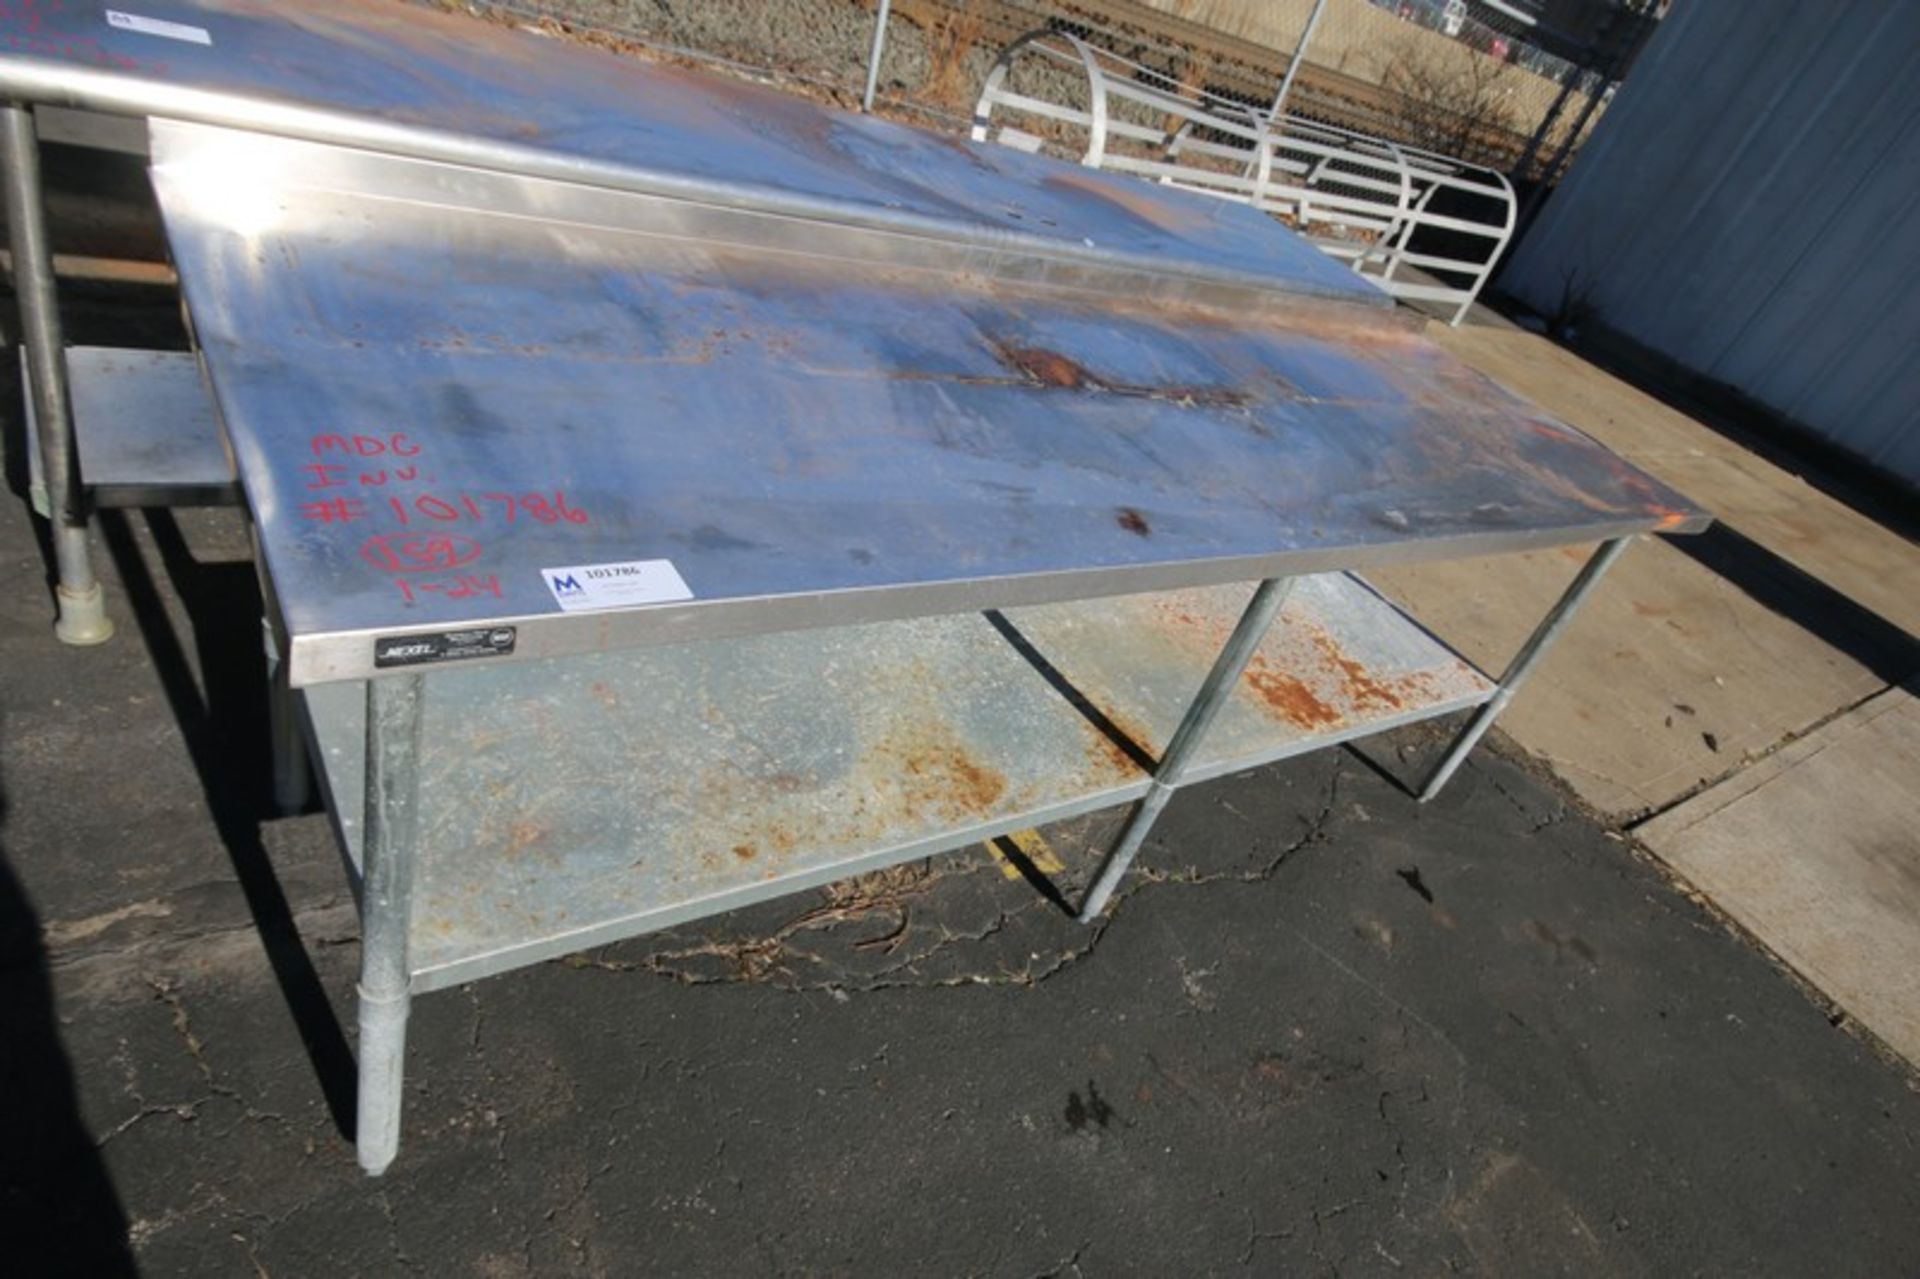 Nexel 8' L x 30" W x 34" H S/S Top Table (INV#101786) (Located @ the MDG Auction Showroom in Pgh.,